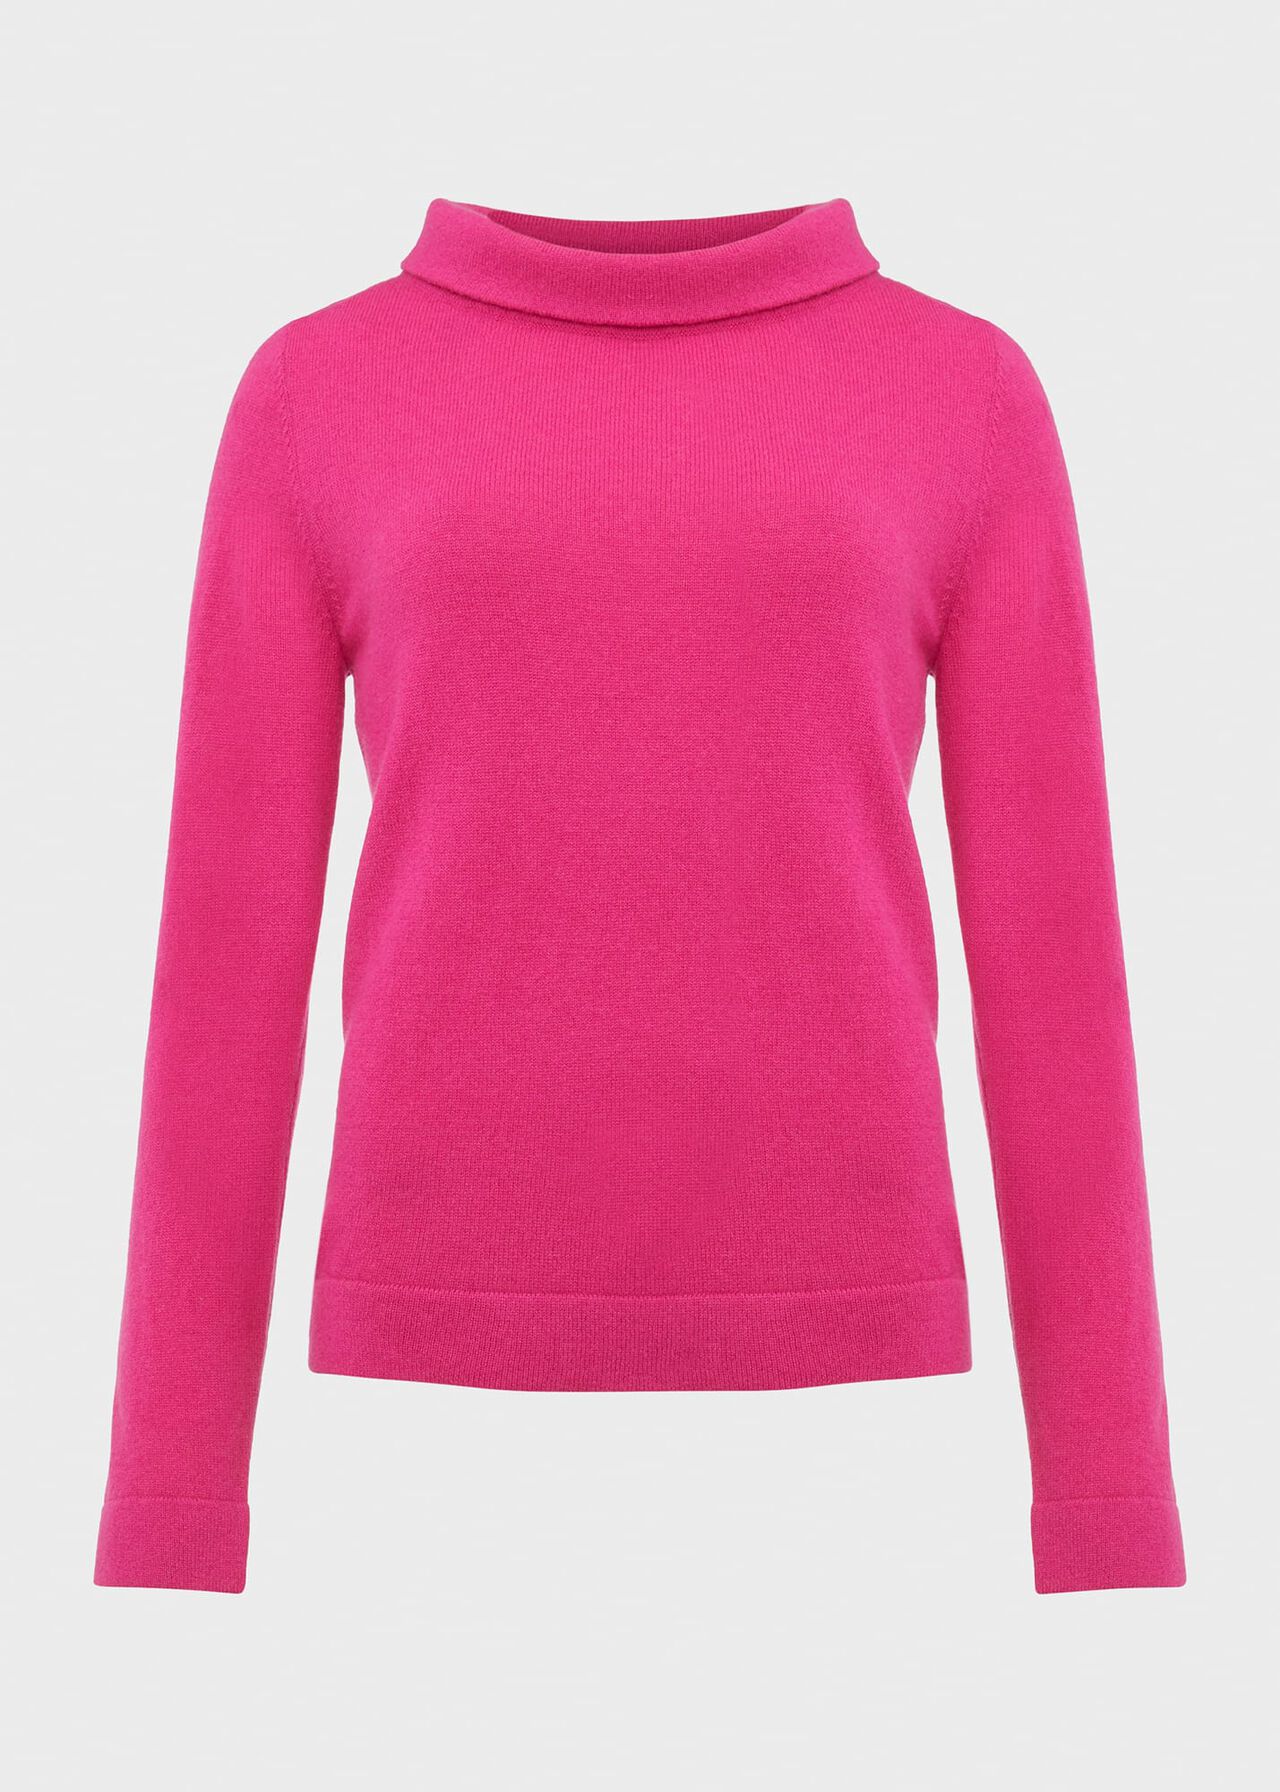 Audrey Wool Cashmere Sweater, Pink, hi-res